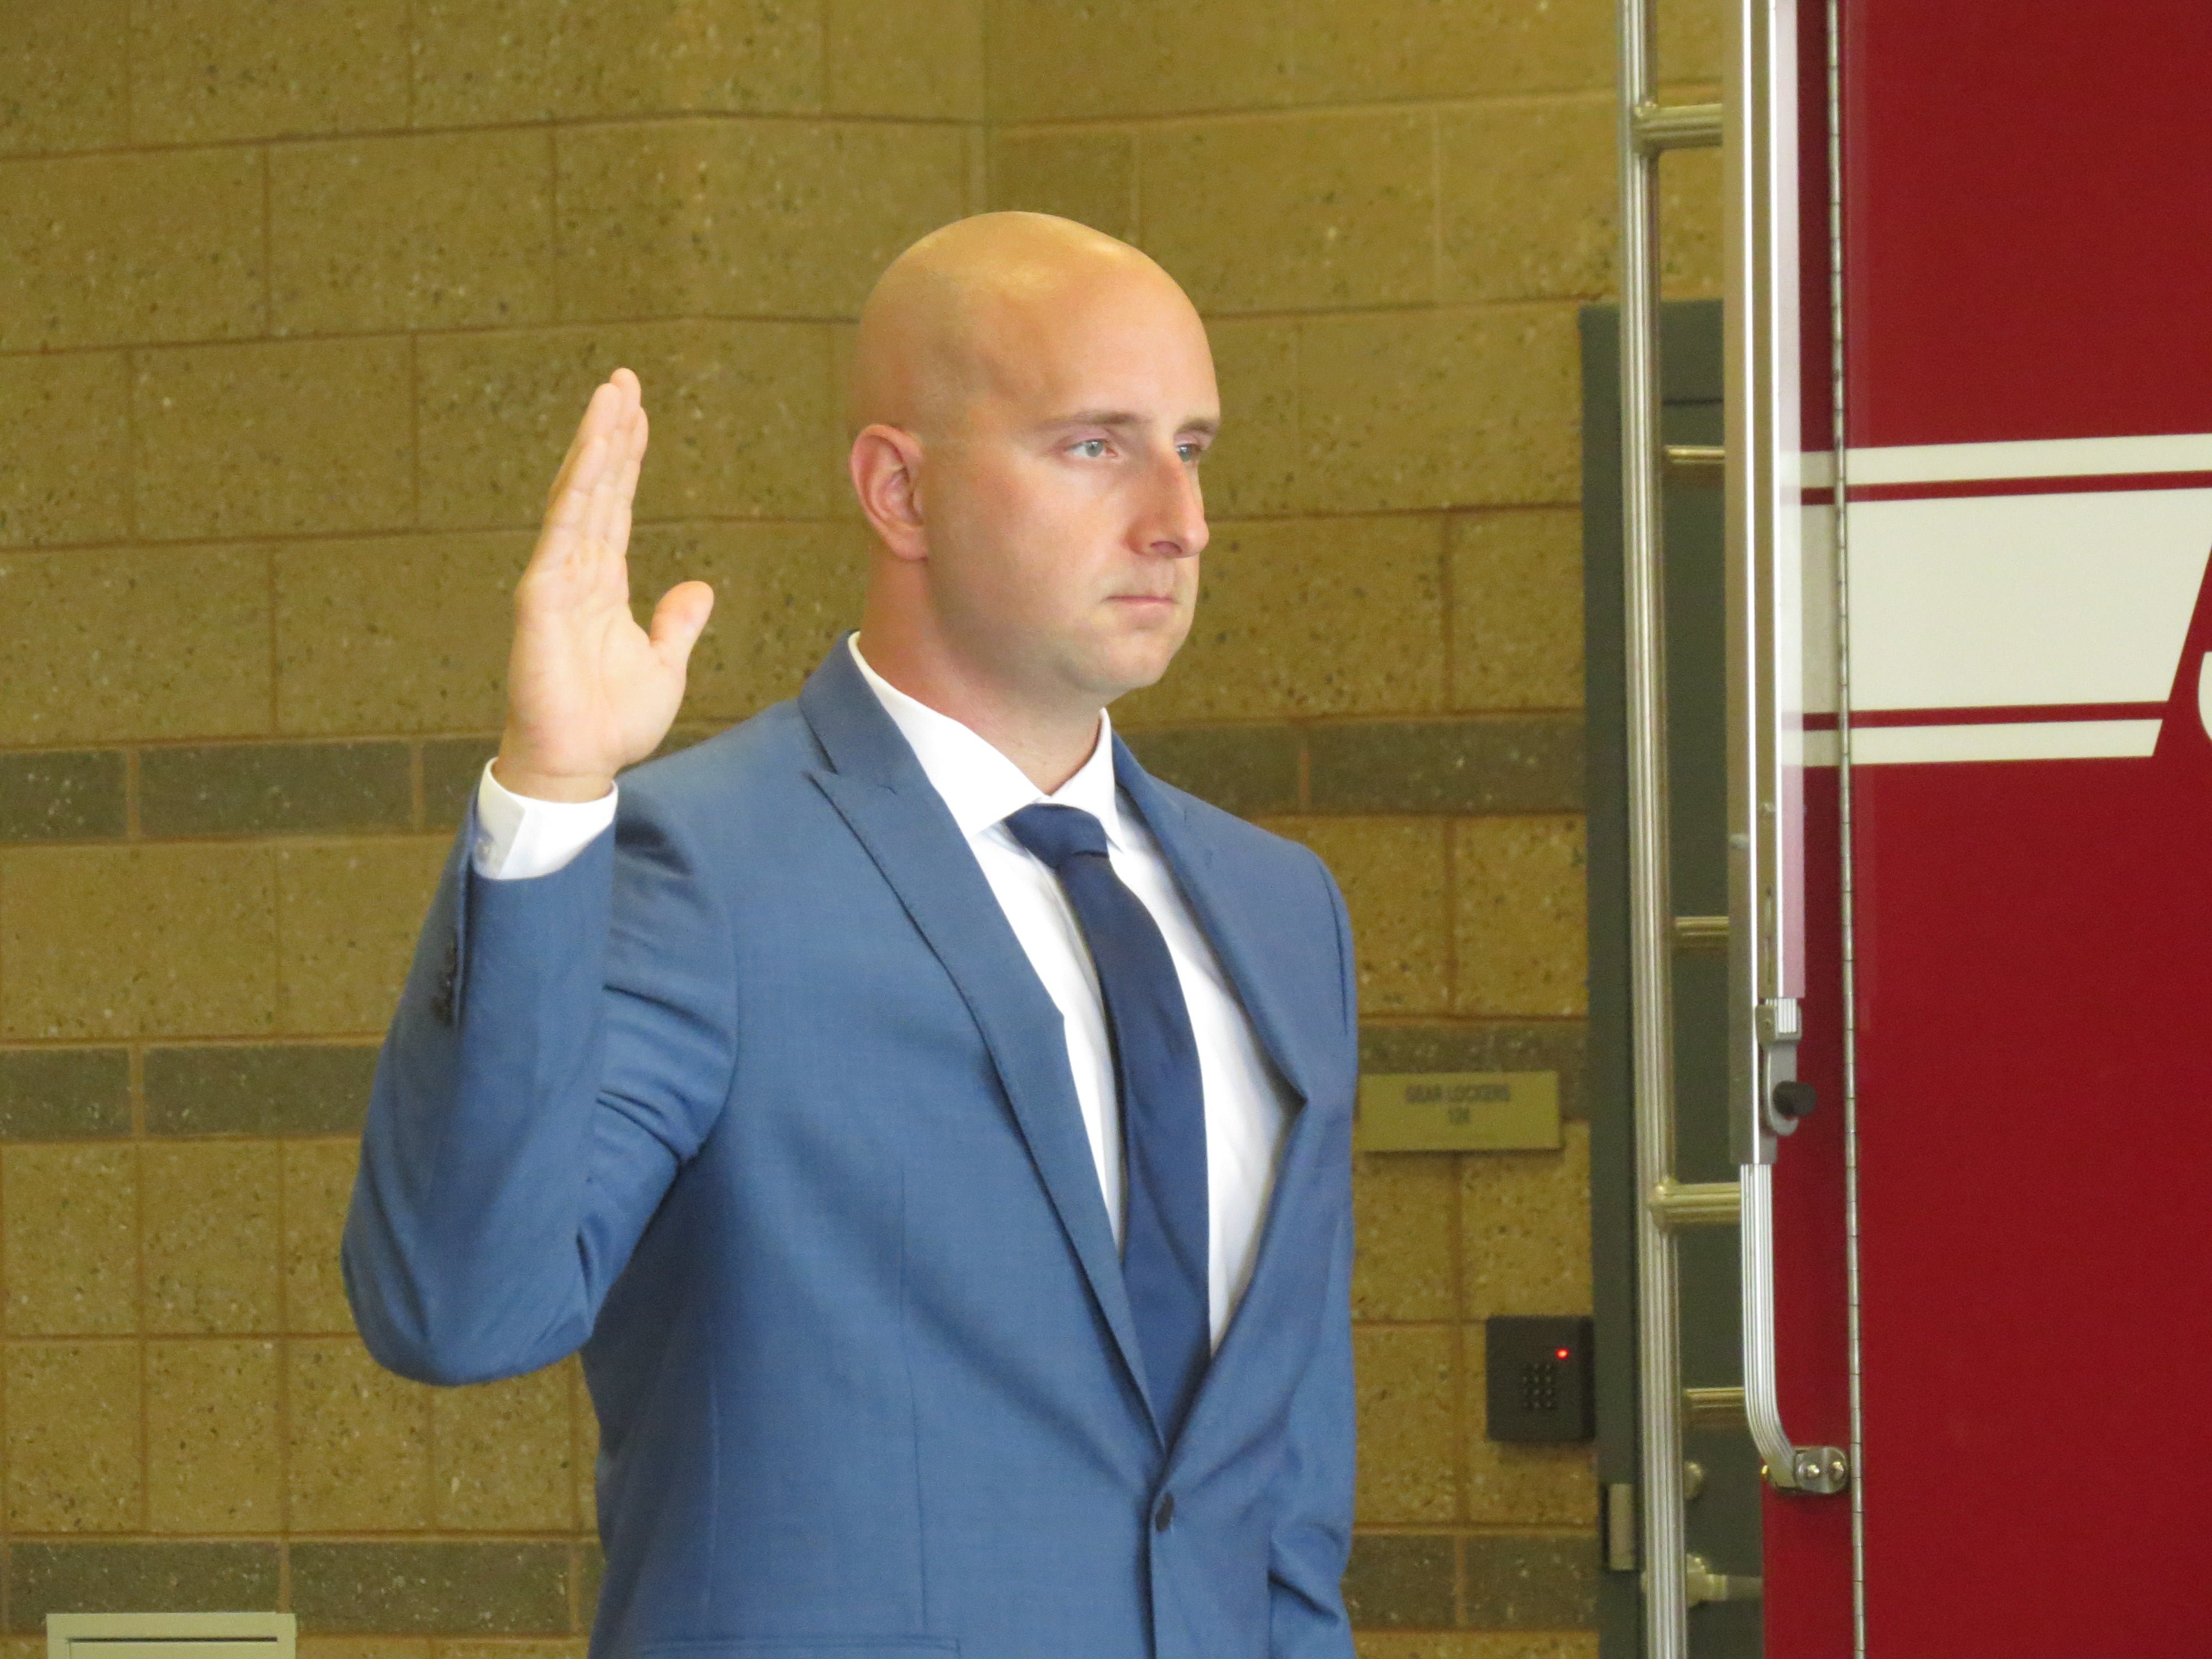 Peter Purcell swears in to be a new member of the Greenwich Fire Department. July 28, 2017. Photo: Devon Bedoya